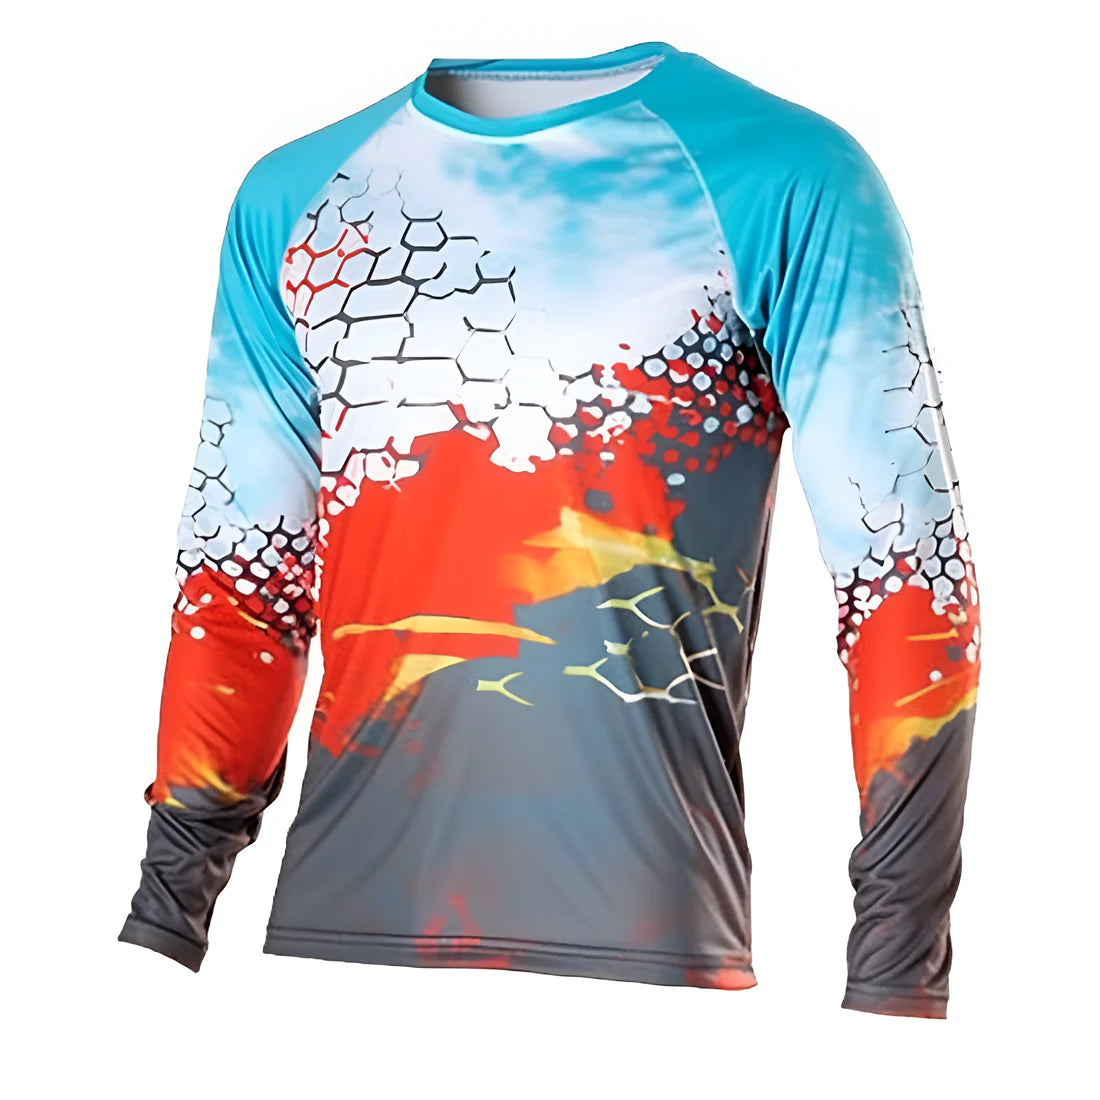 Skydiving sublimation printed jersey-025